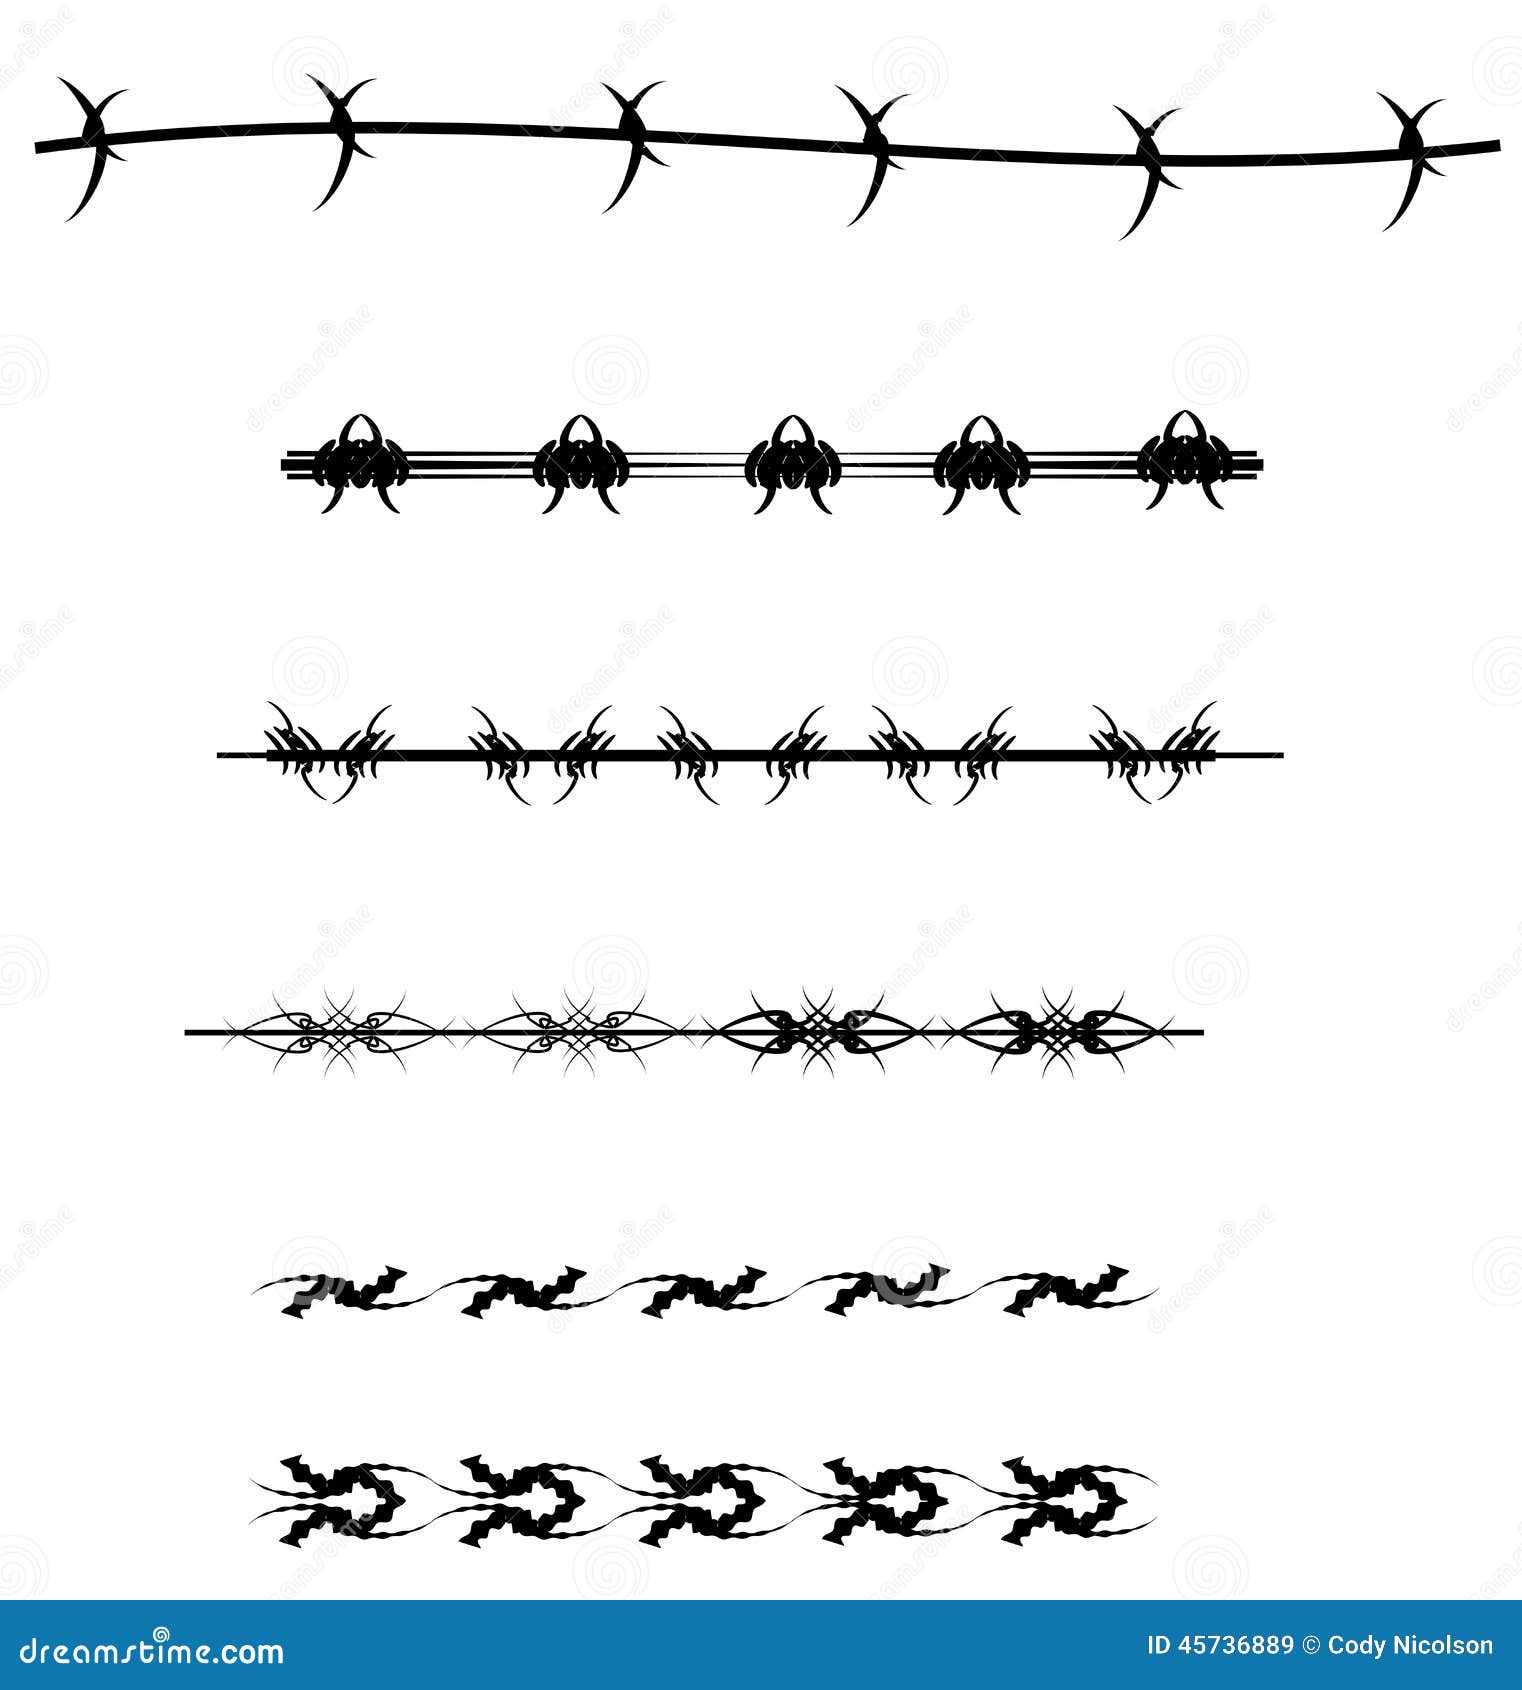 Barbed Wire 3  Graffiti Barbed wire tattoos Tattoo drawings